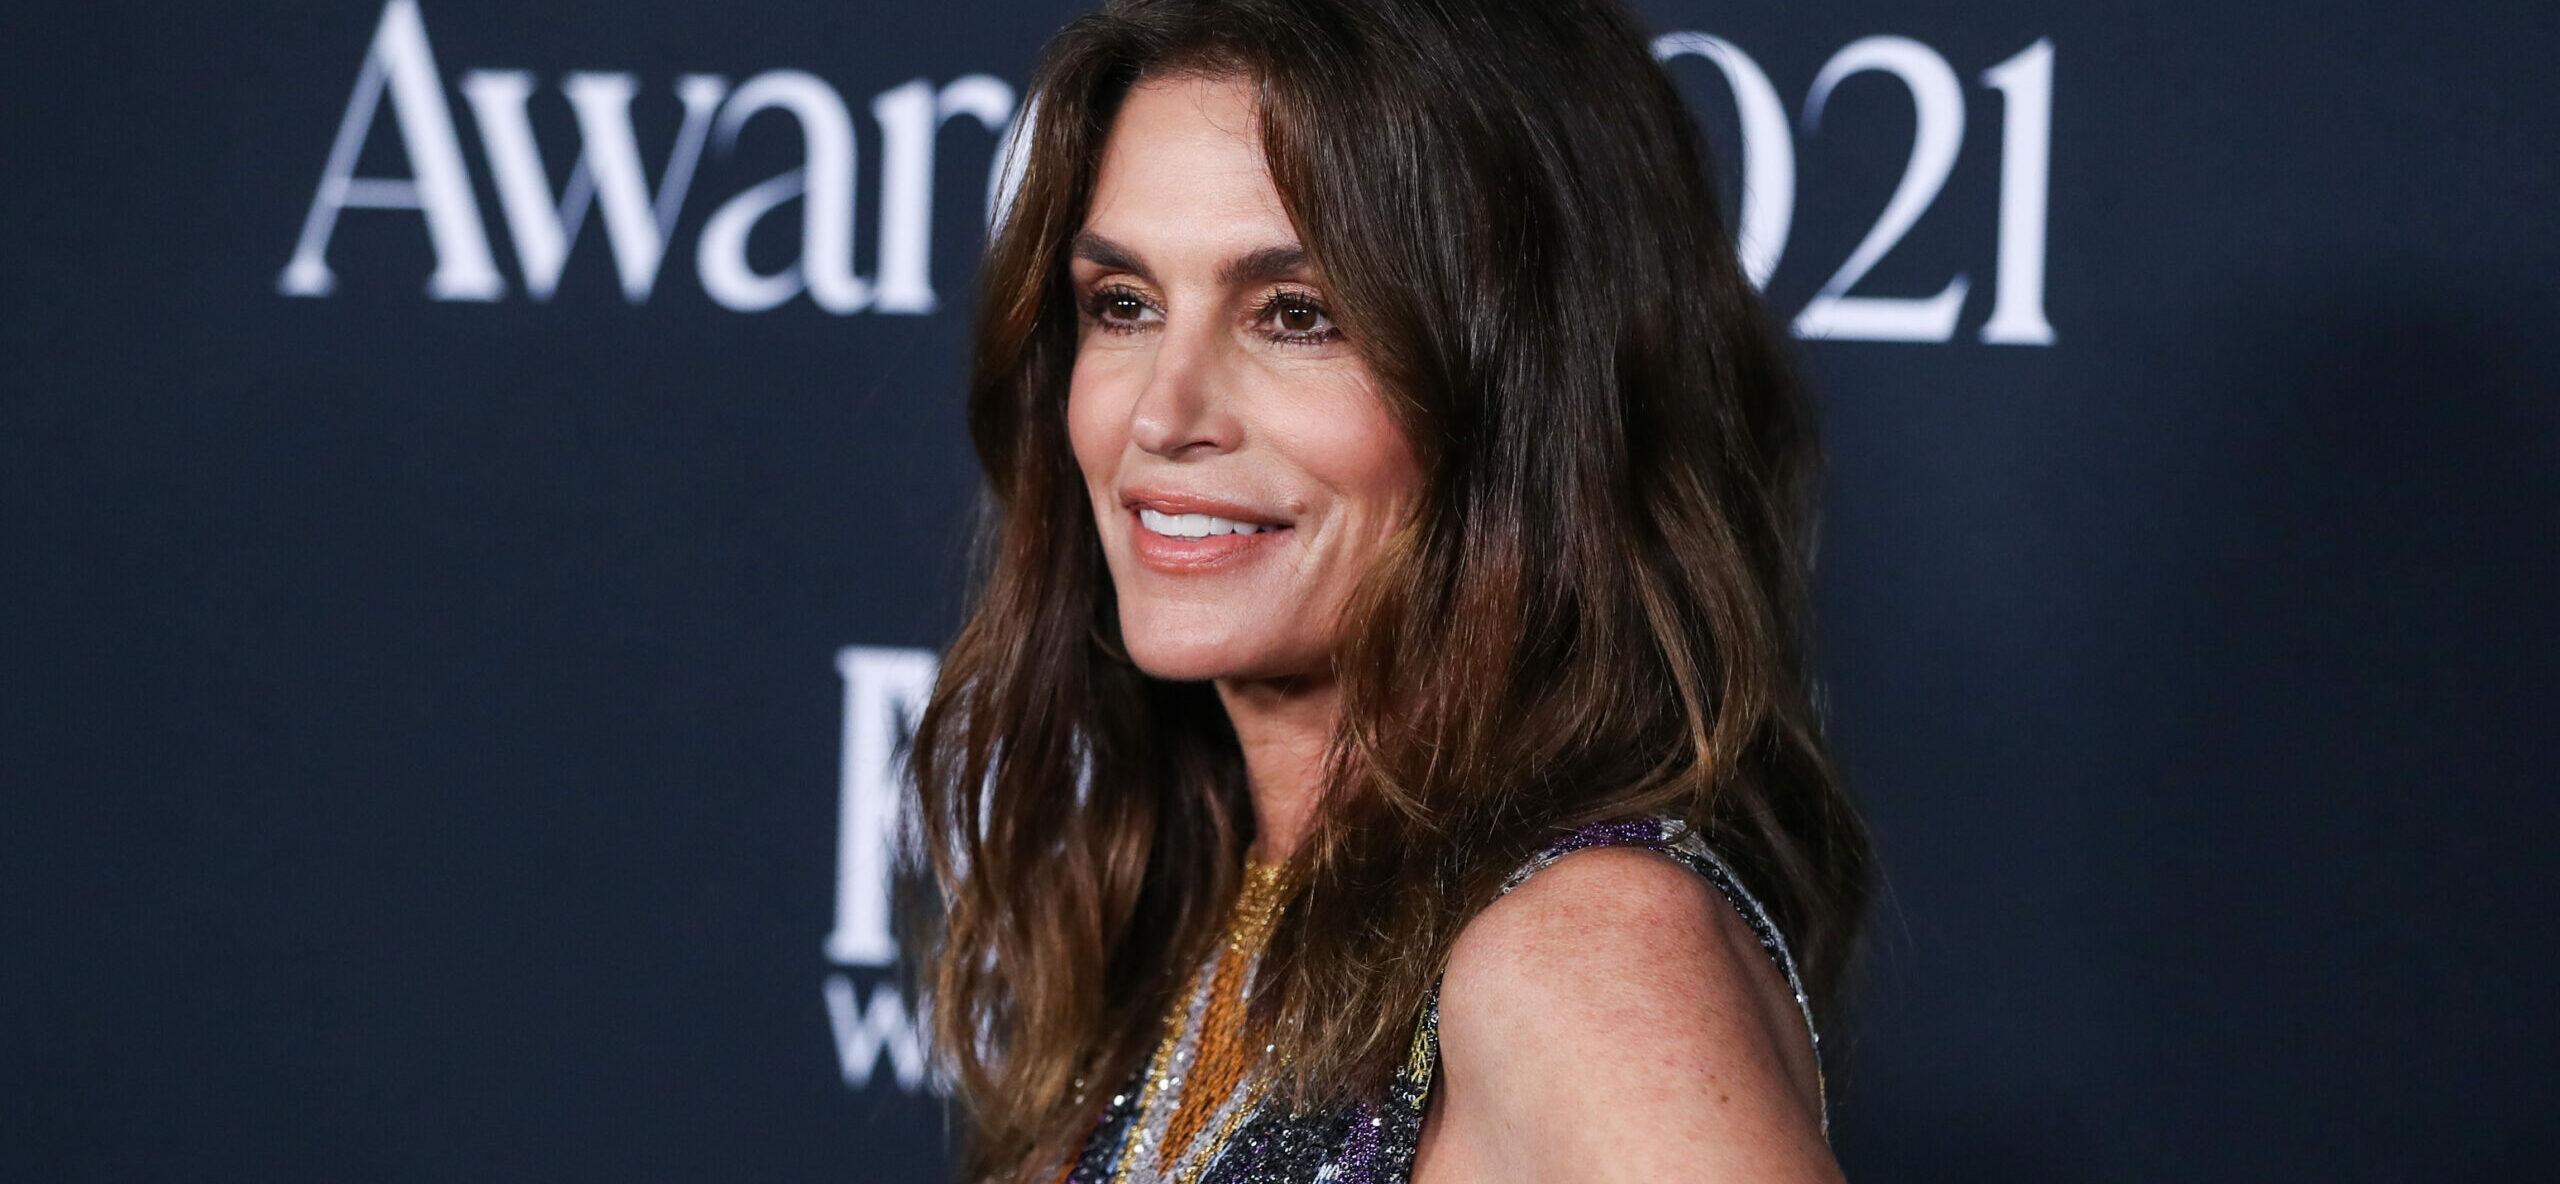 Cindy Crawford Looks Ageless Makeup-Free For Lunch Date With Her Son Presley Gerber